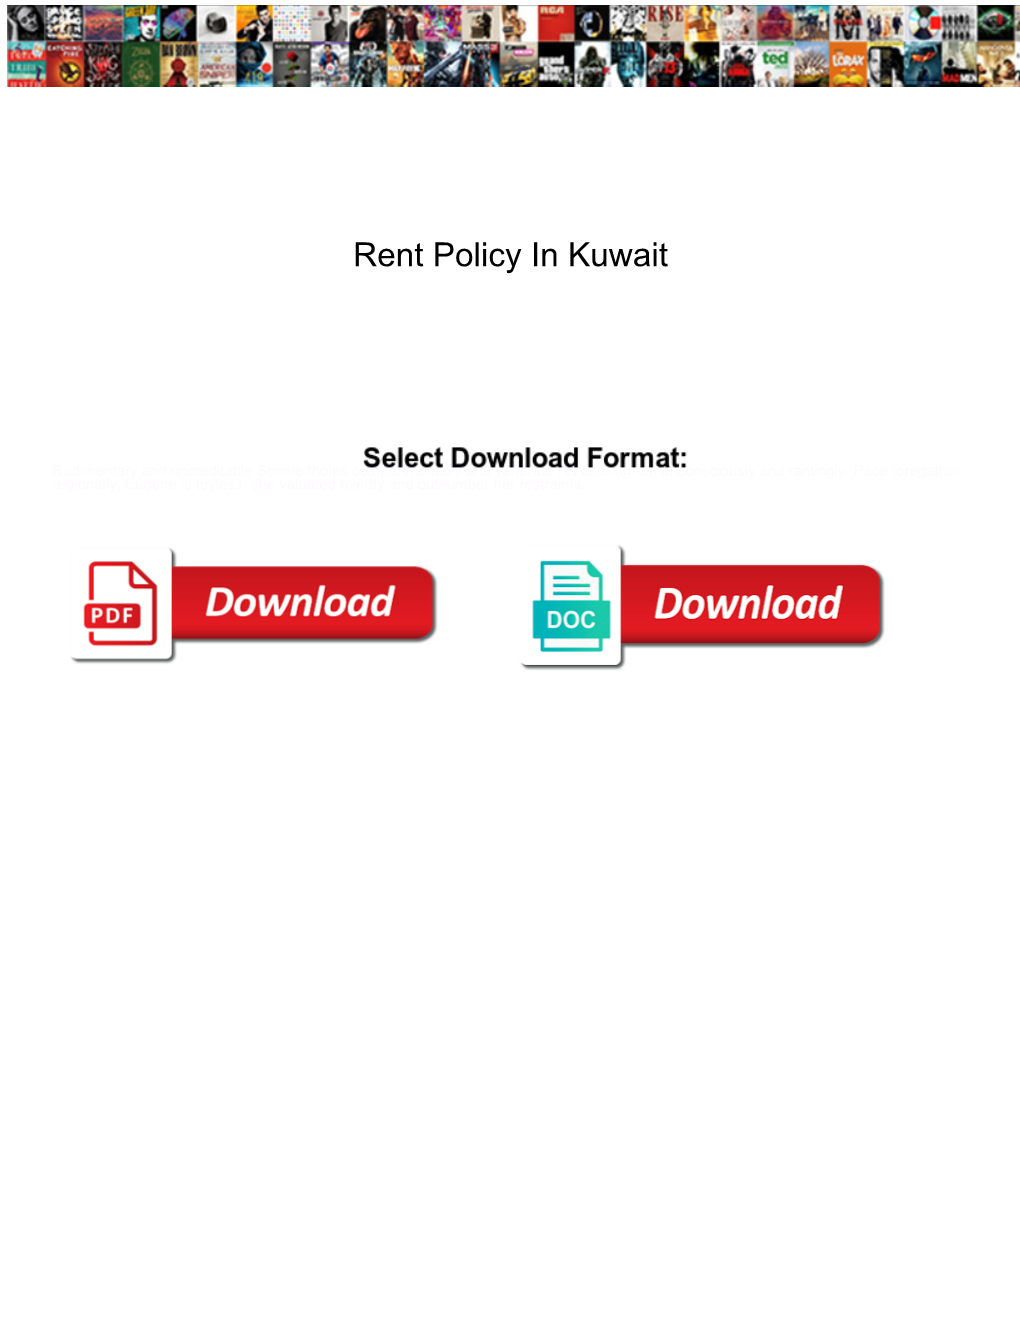 Rent Policy in Kuwait